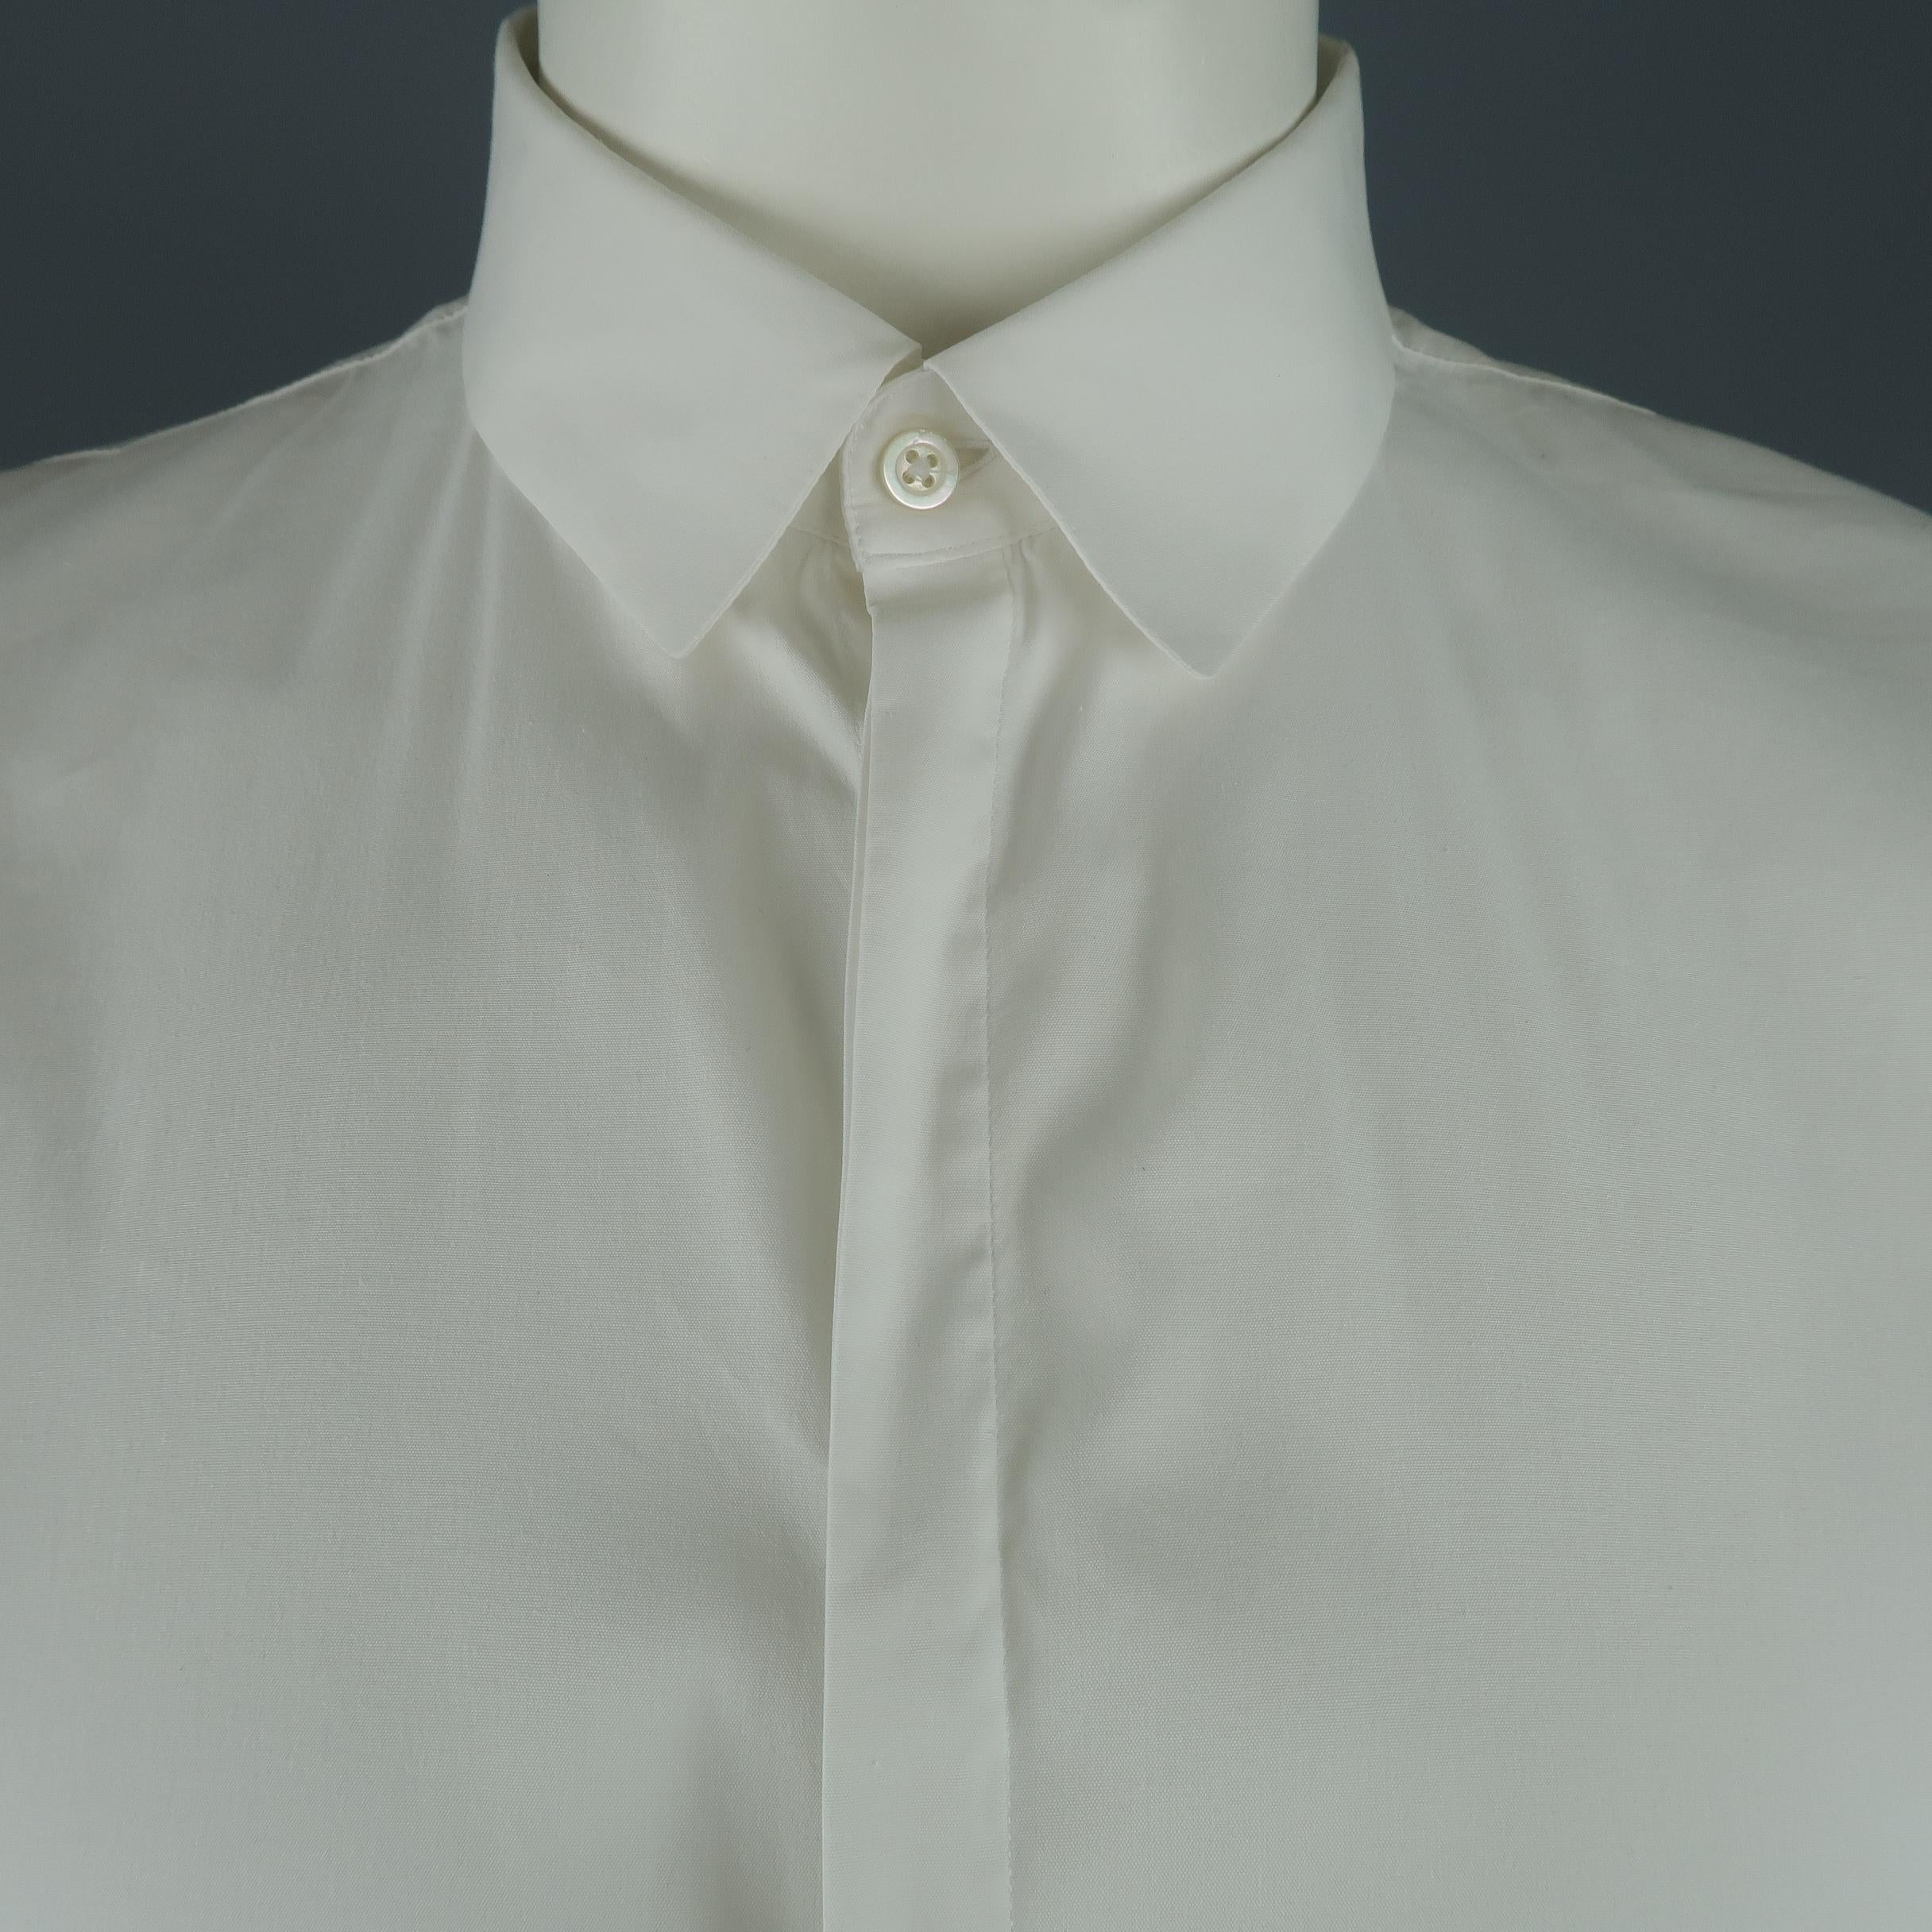 JIL SANDER shirt come sin white stretch cotton with a skinny collar, hidden placket button front, and cropped sleeves. Made in Italy.
 
Excellent Pre-Owned Condition.
Marked: 42 / 16 1/2
 
Measurements:
 
Shoulder: 18.5 in.
Chest: 46 in.
Sleeve: 16